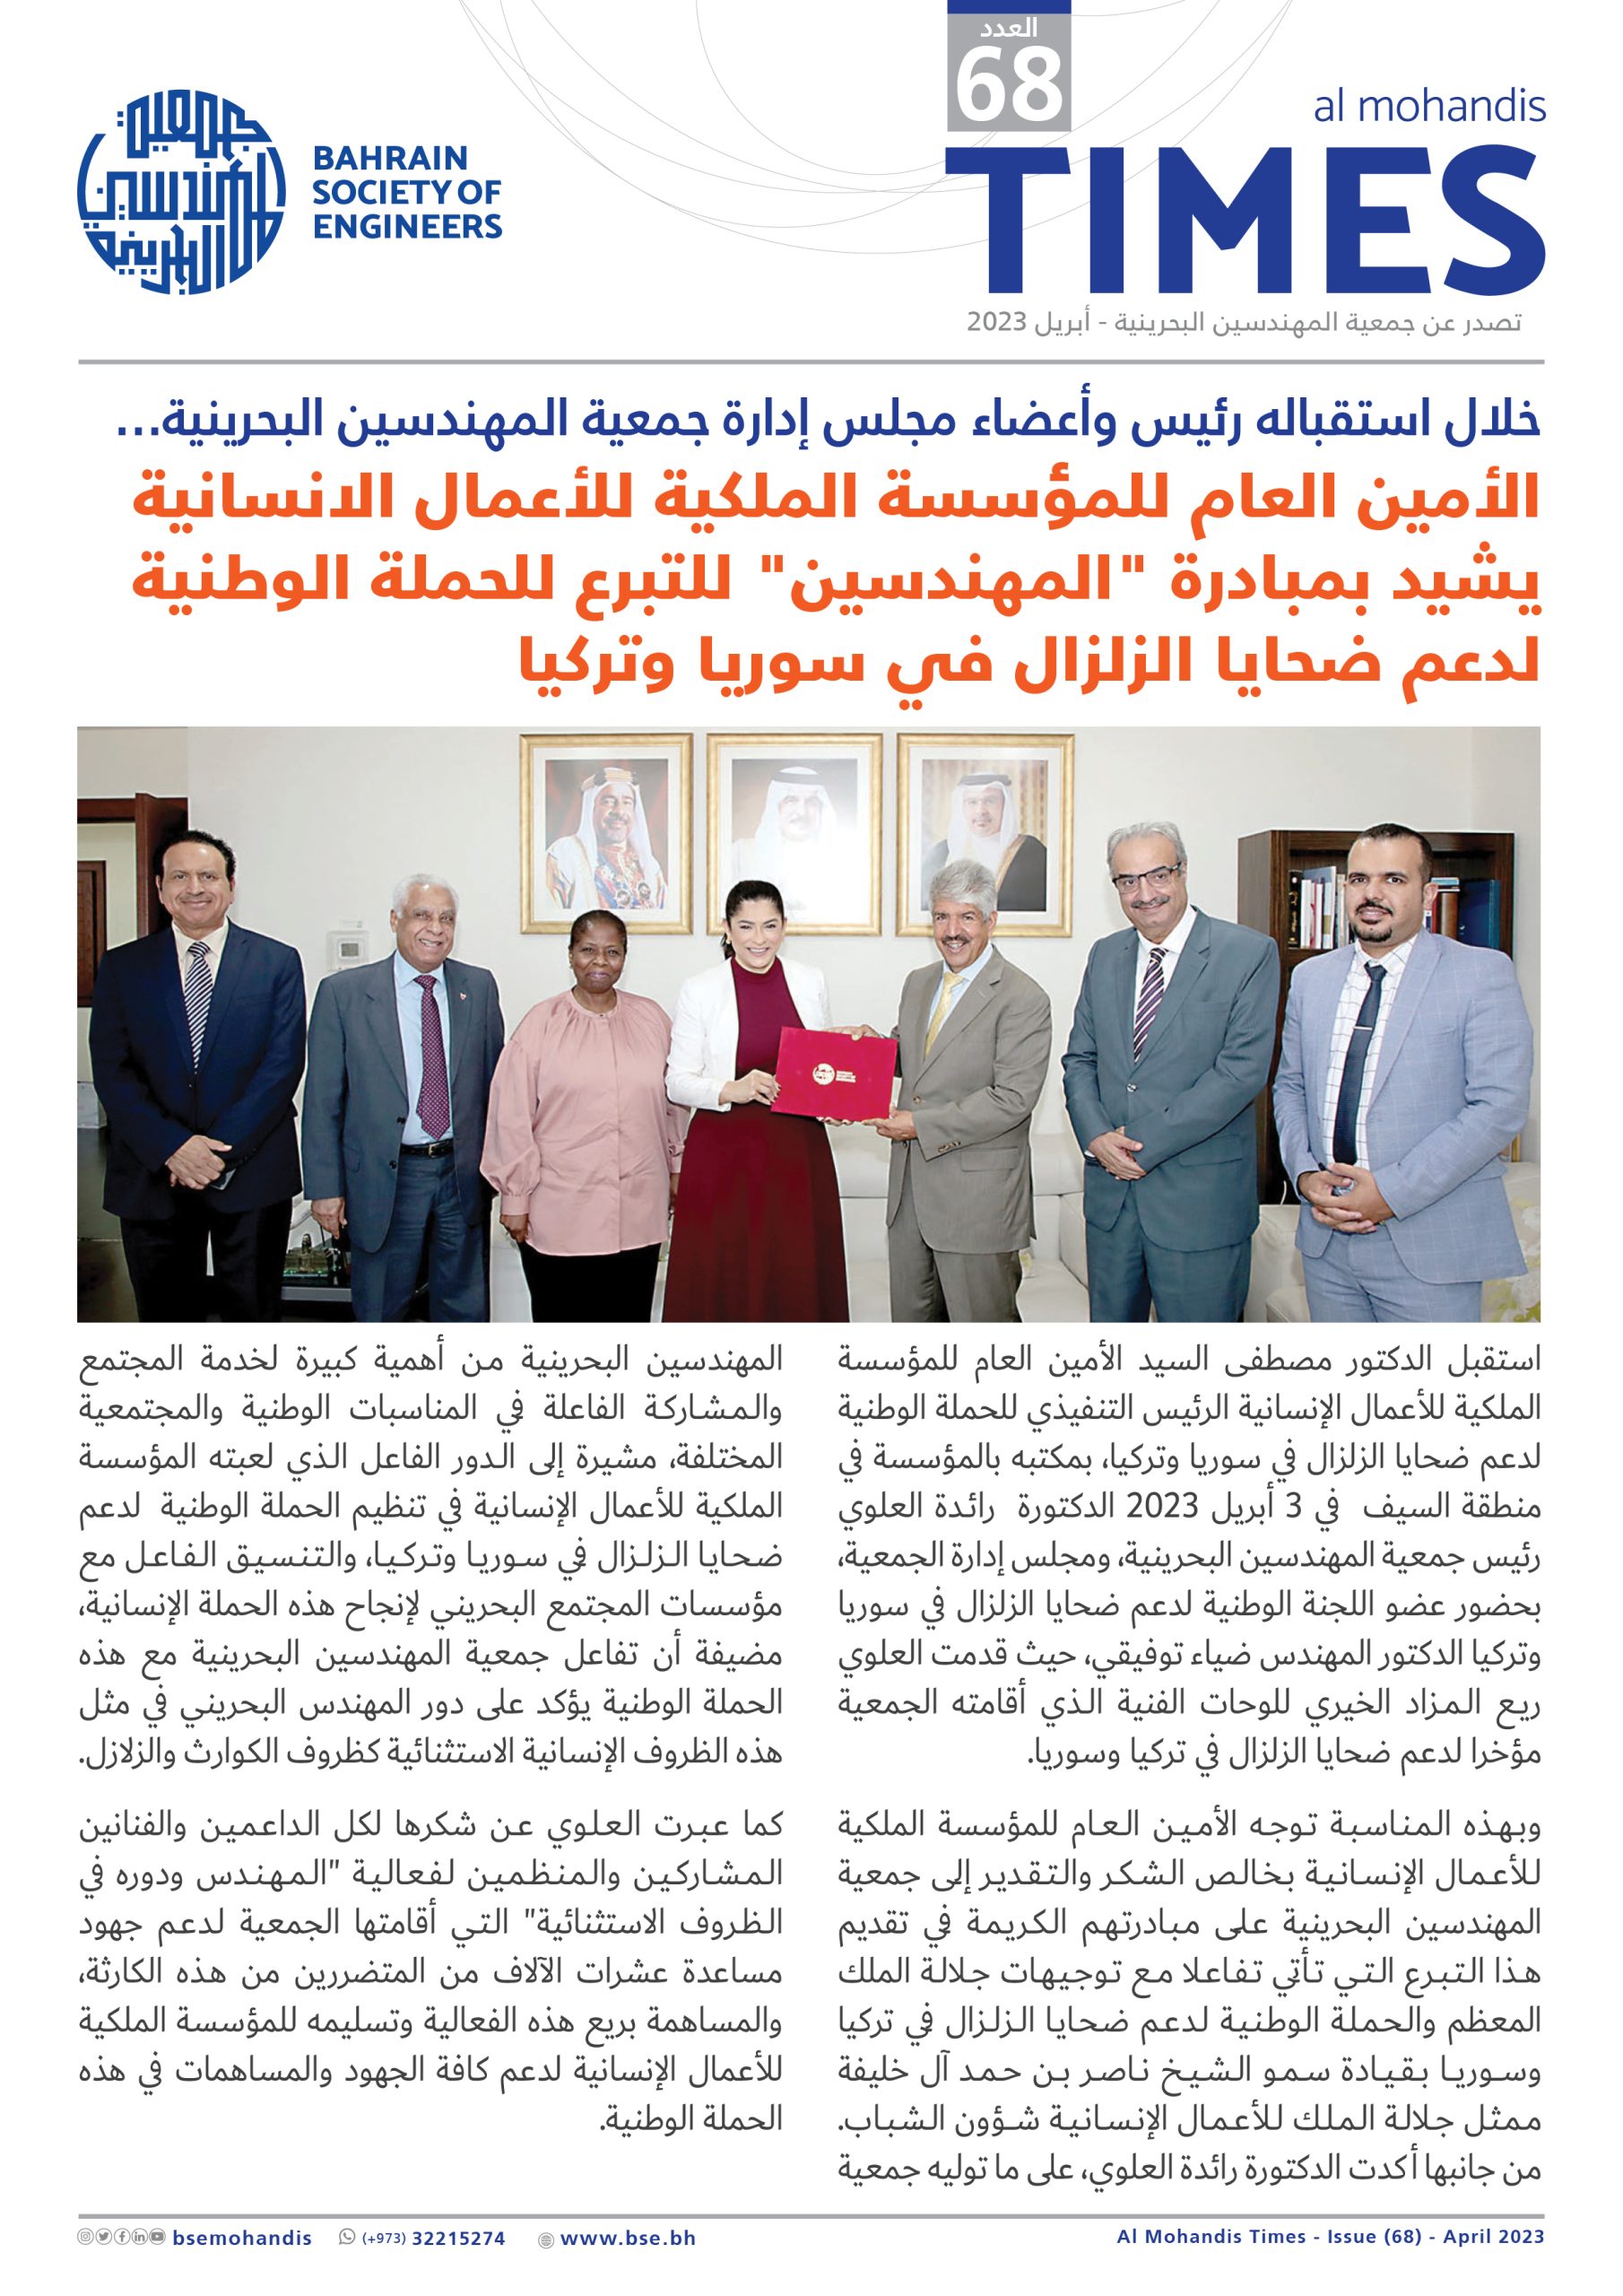 Al Mohandis Times Issue 68